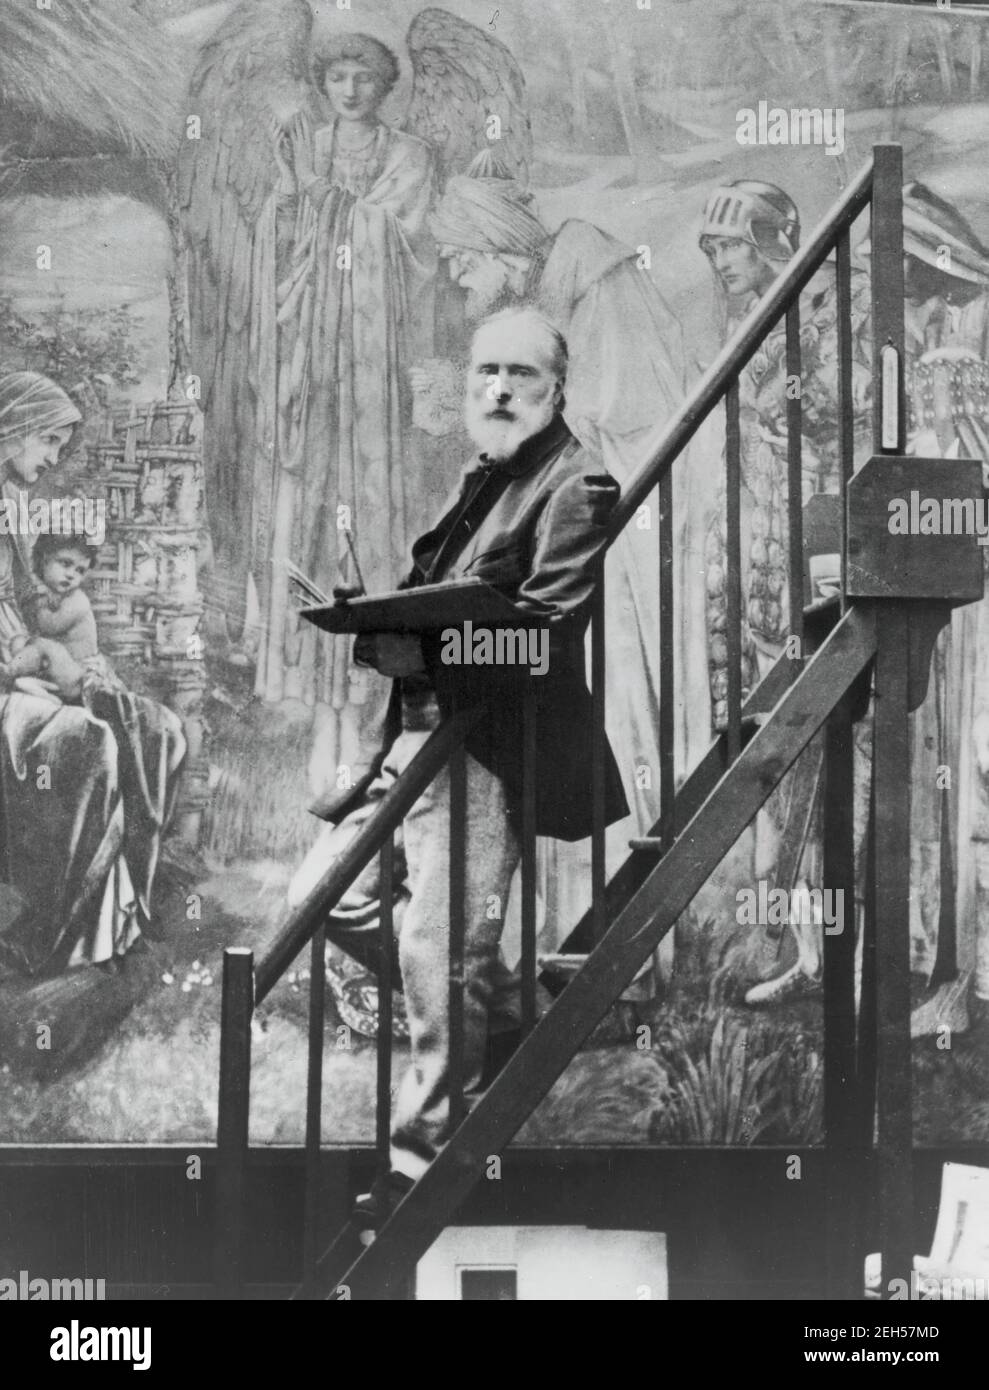 Edward Burne-Jones at work on the Star of Bethlehem, 1895. Frederick Hollyer Image taken while the artist was at work on the watercolour, Star of Bethlehem, at Birmingham Museum and Art Gallery Stock Photo